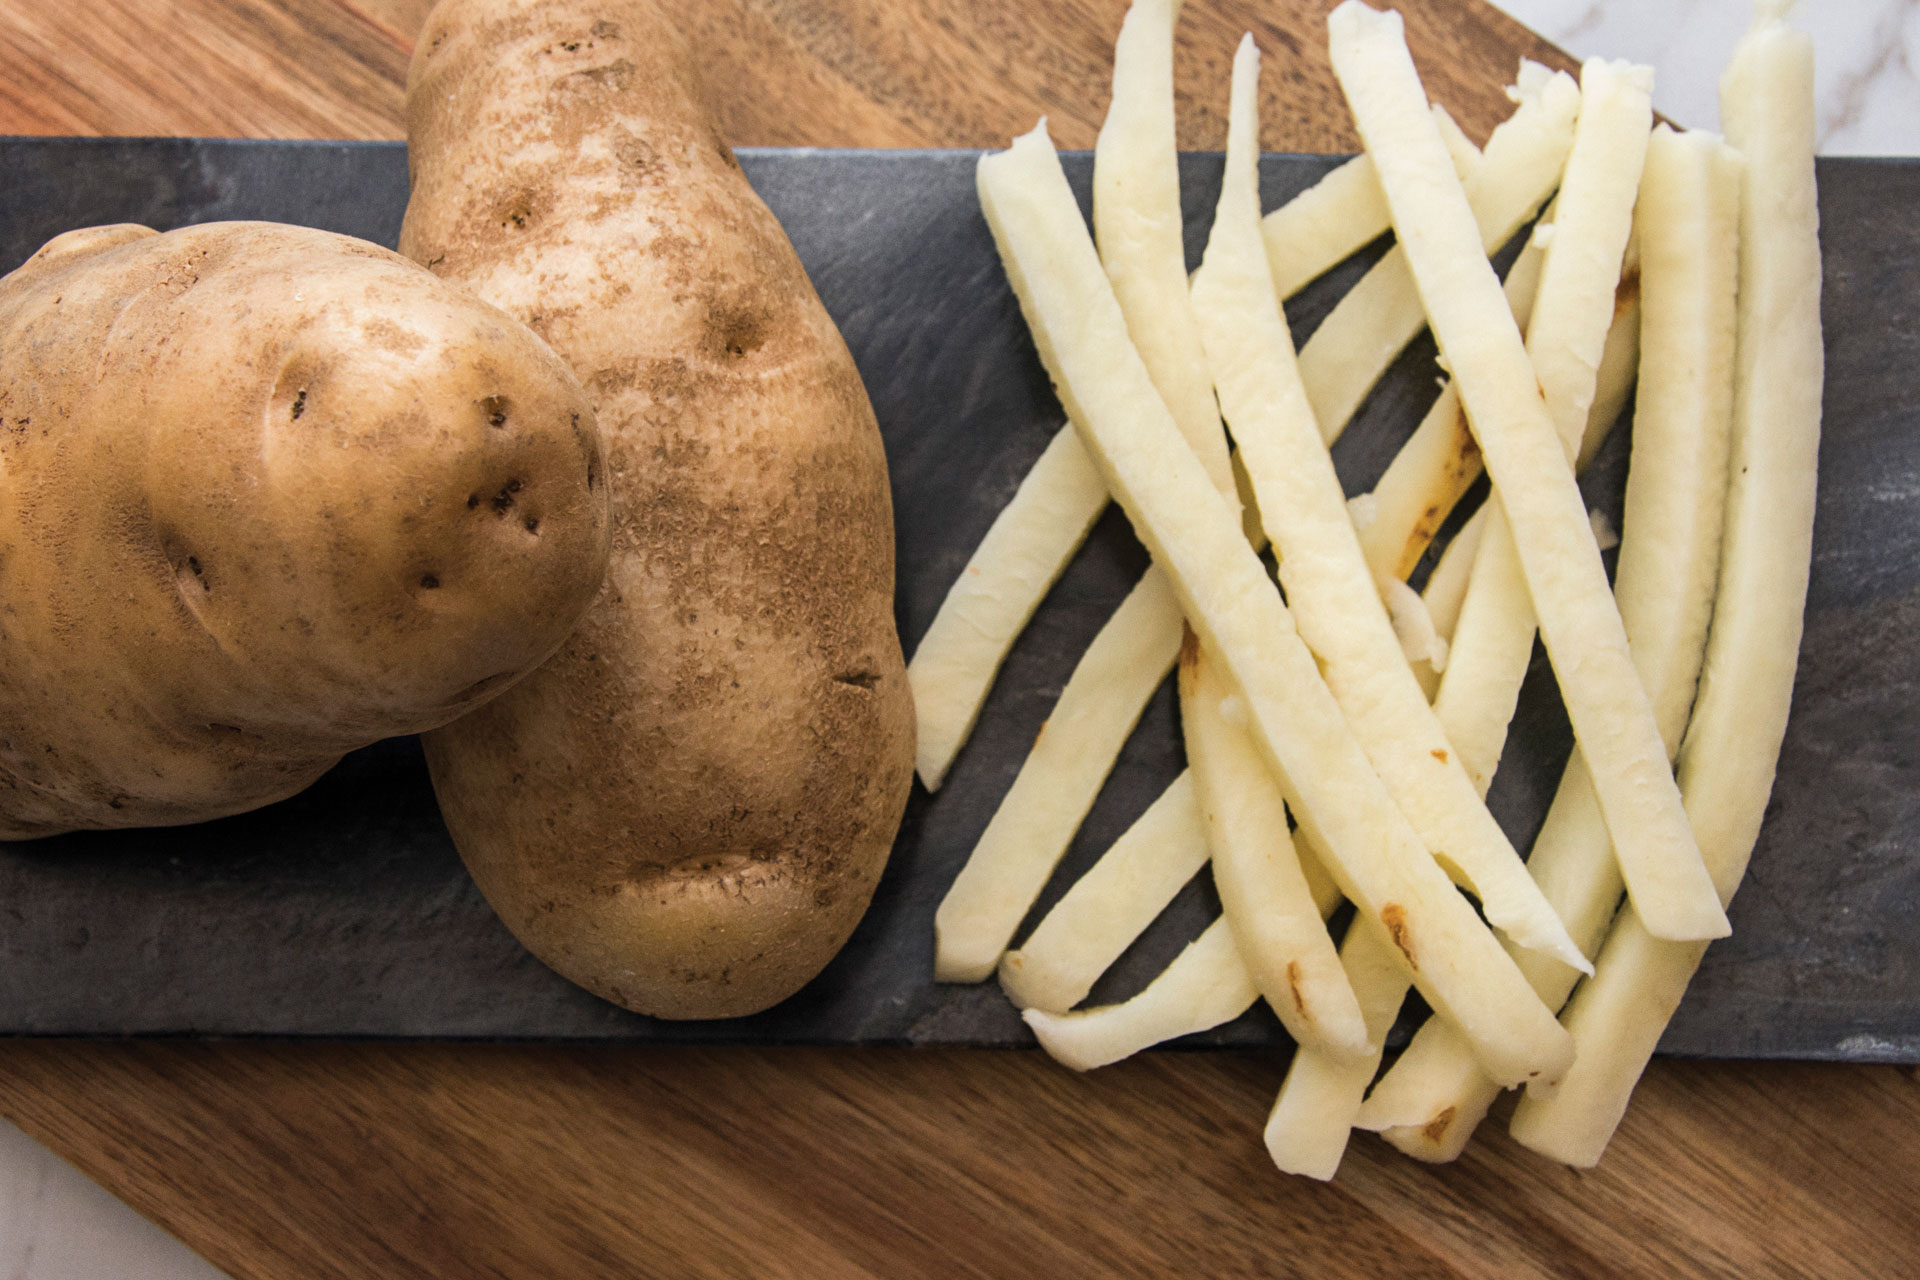  Try our signature   Fresh Cut French Fries    Learn More  